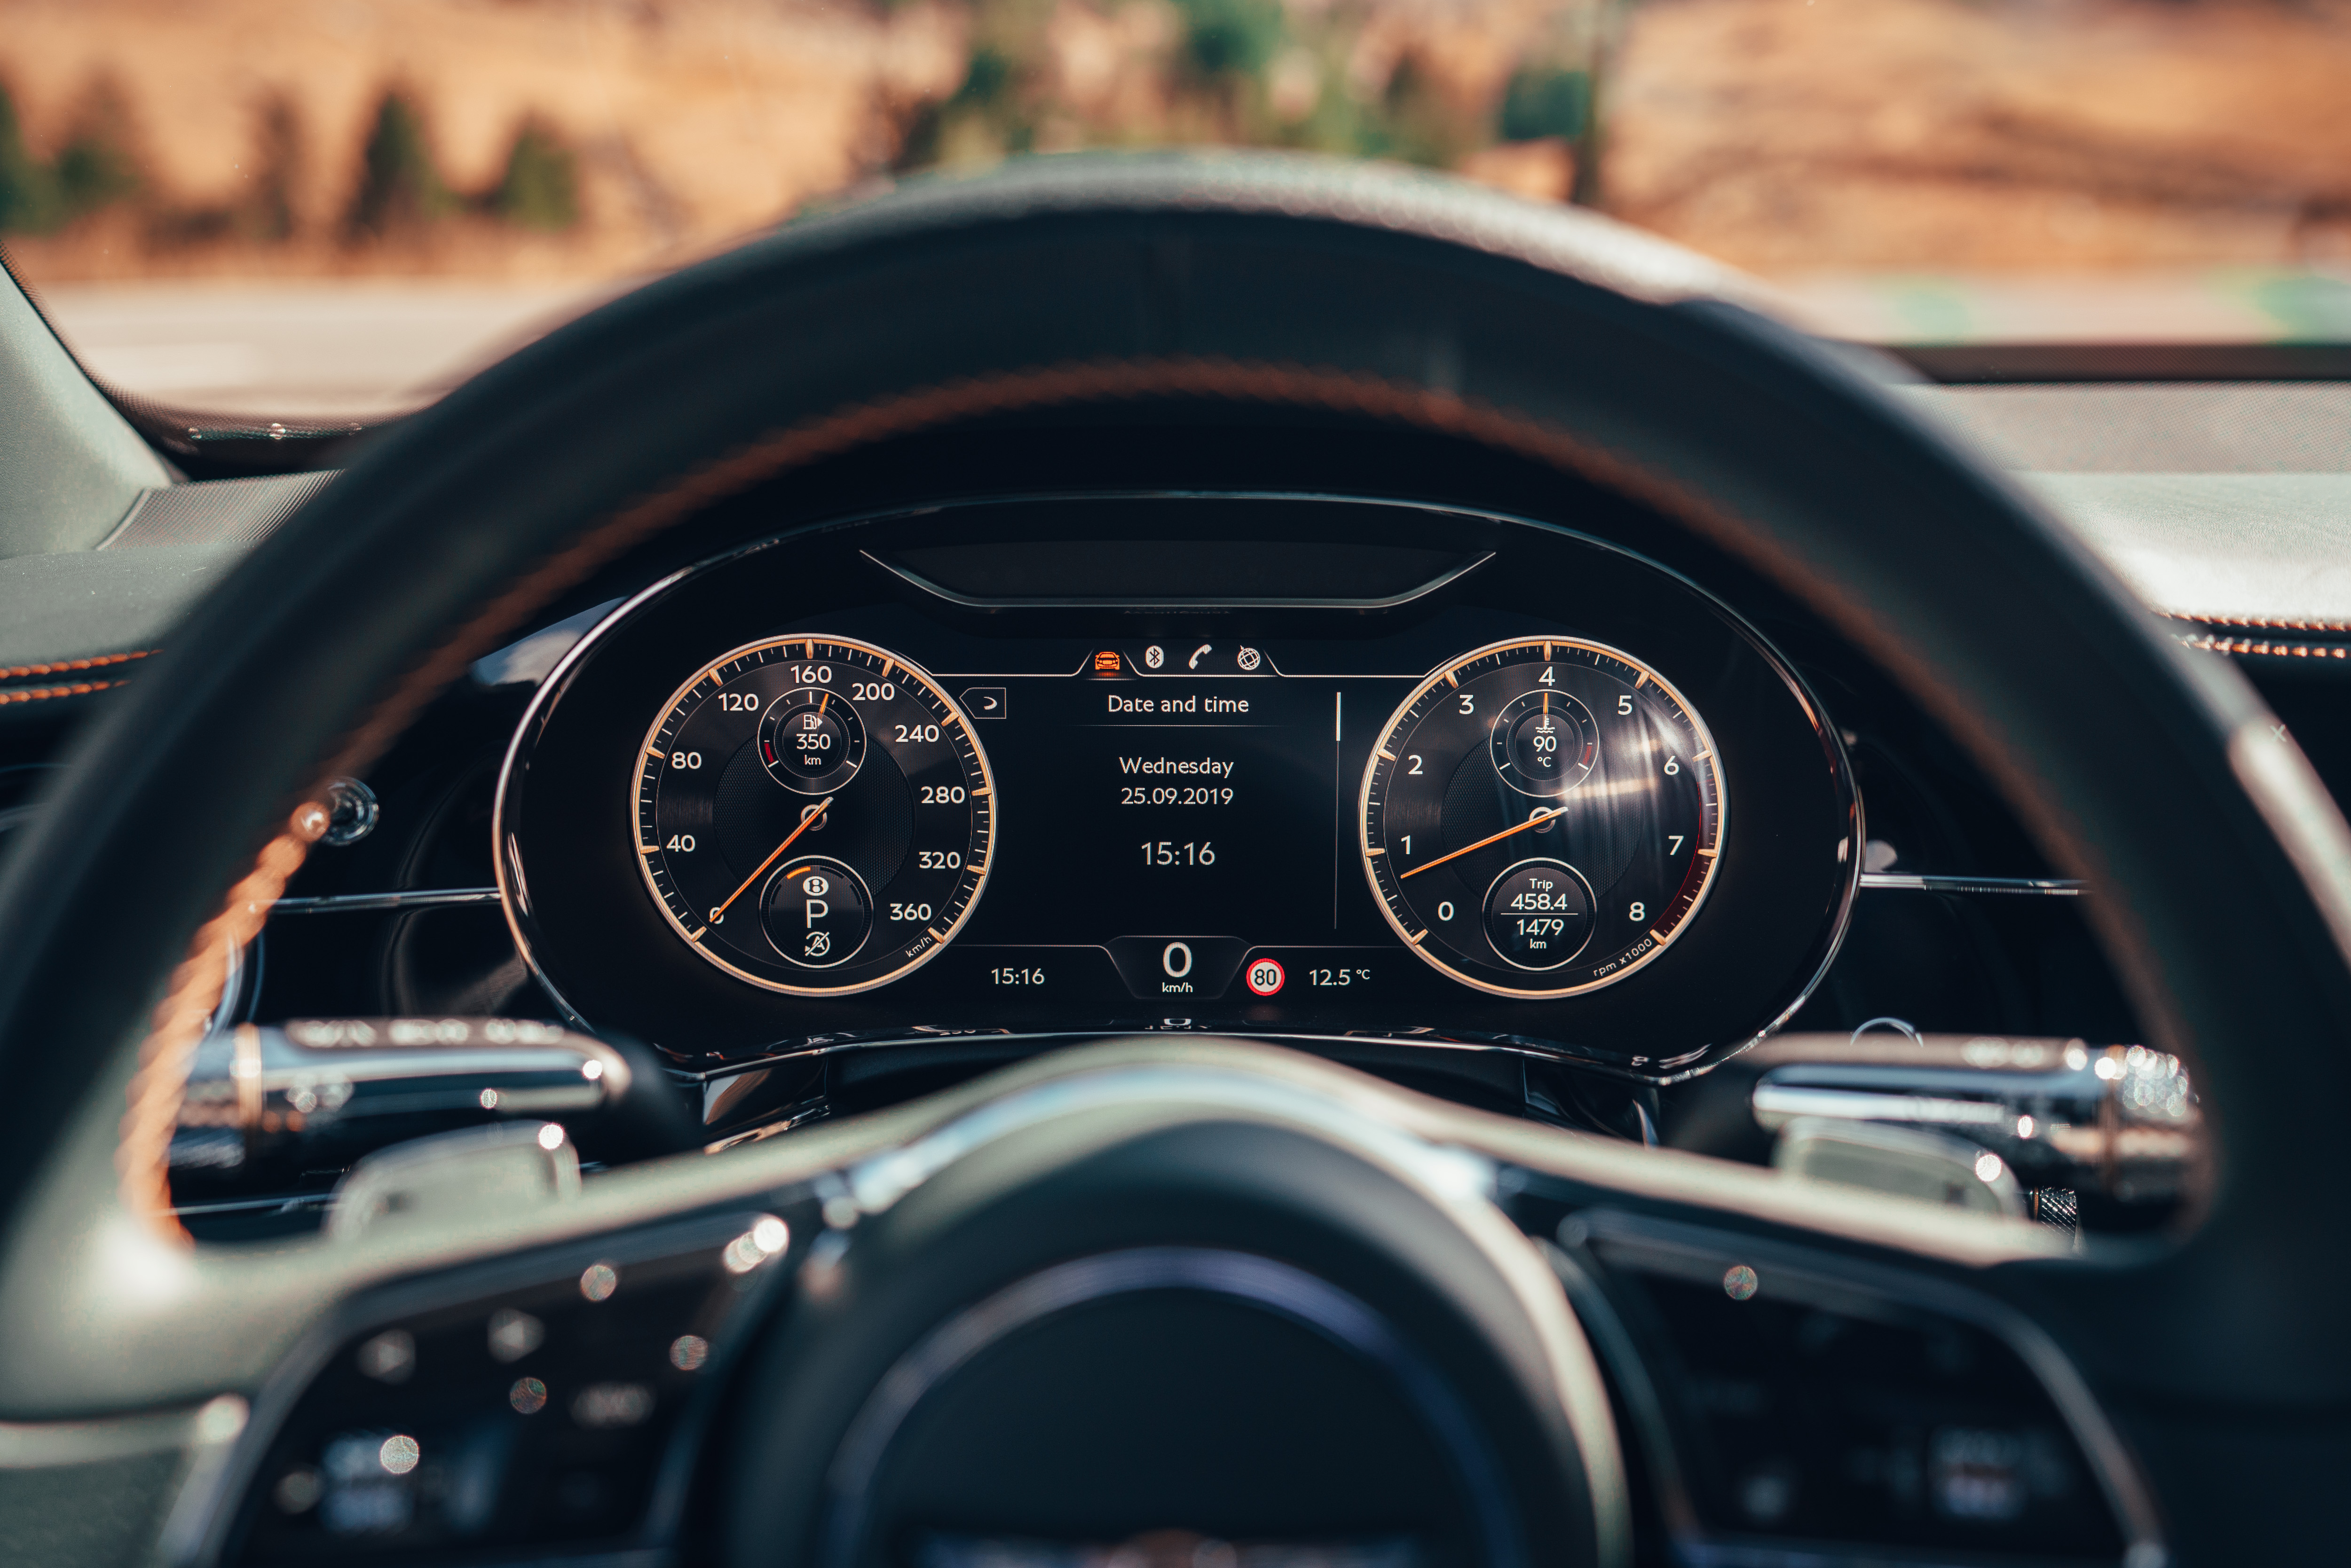 The main dials are twin screens